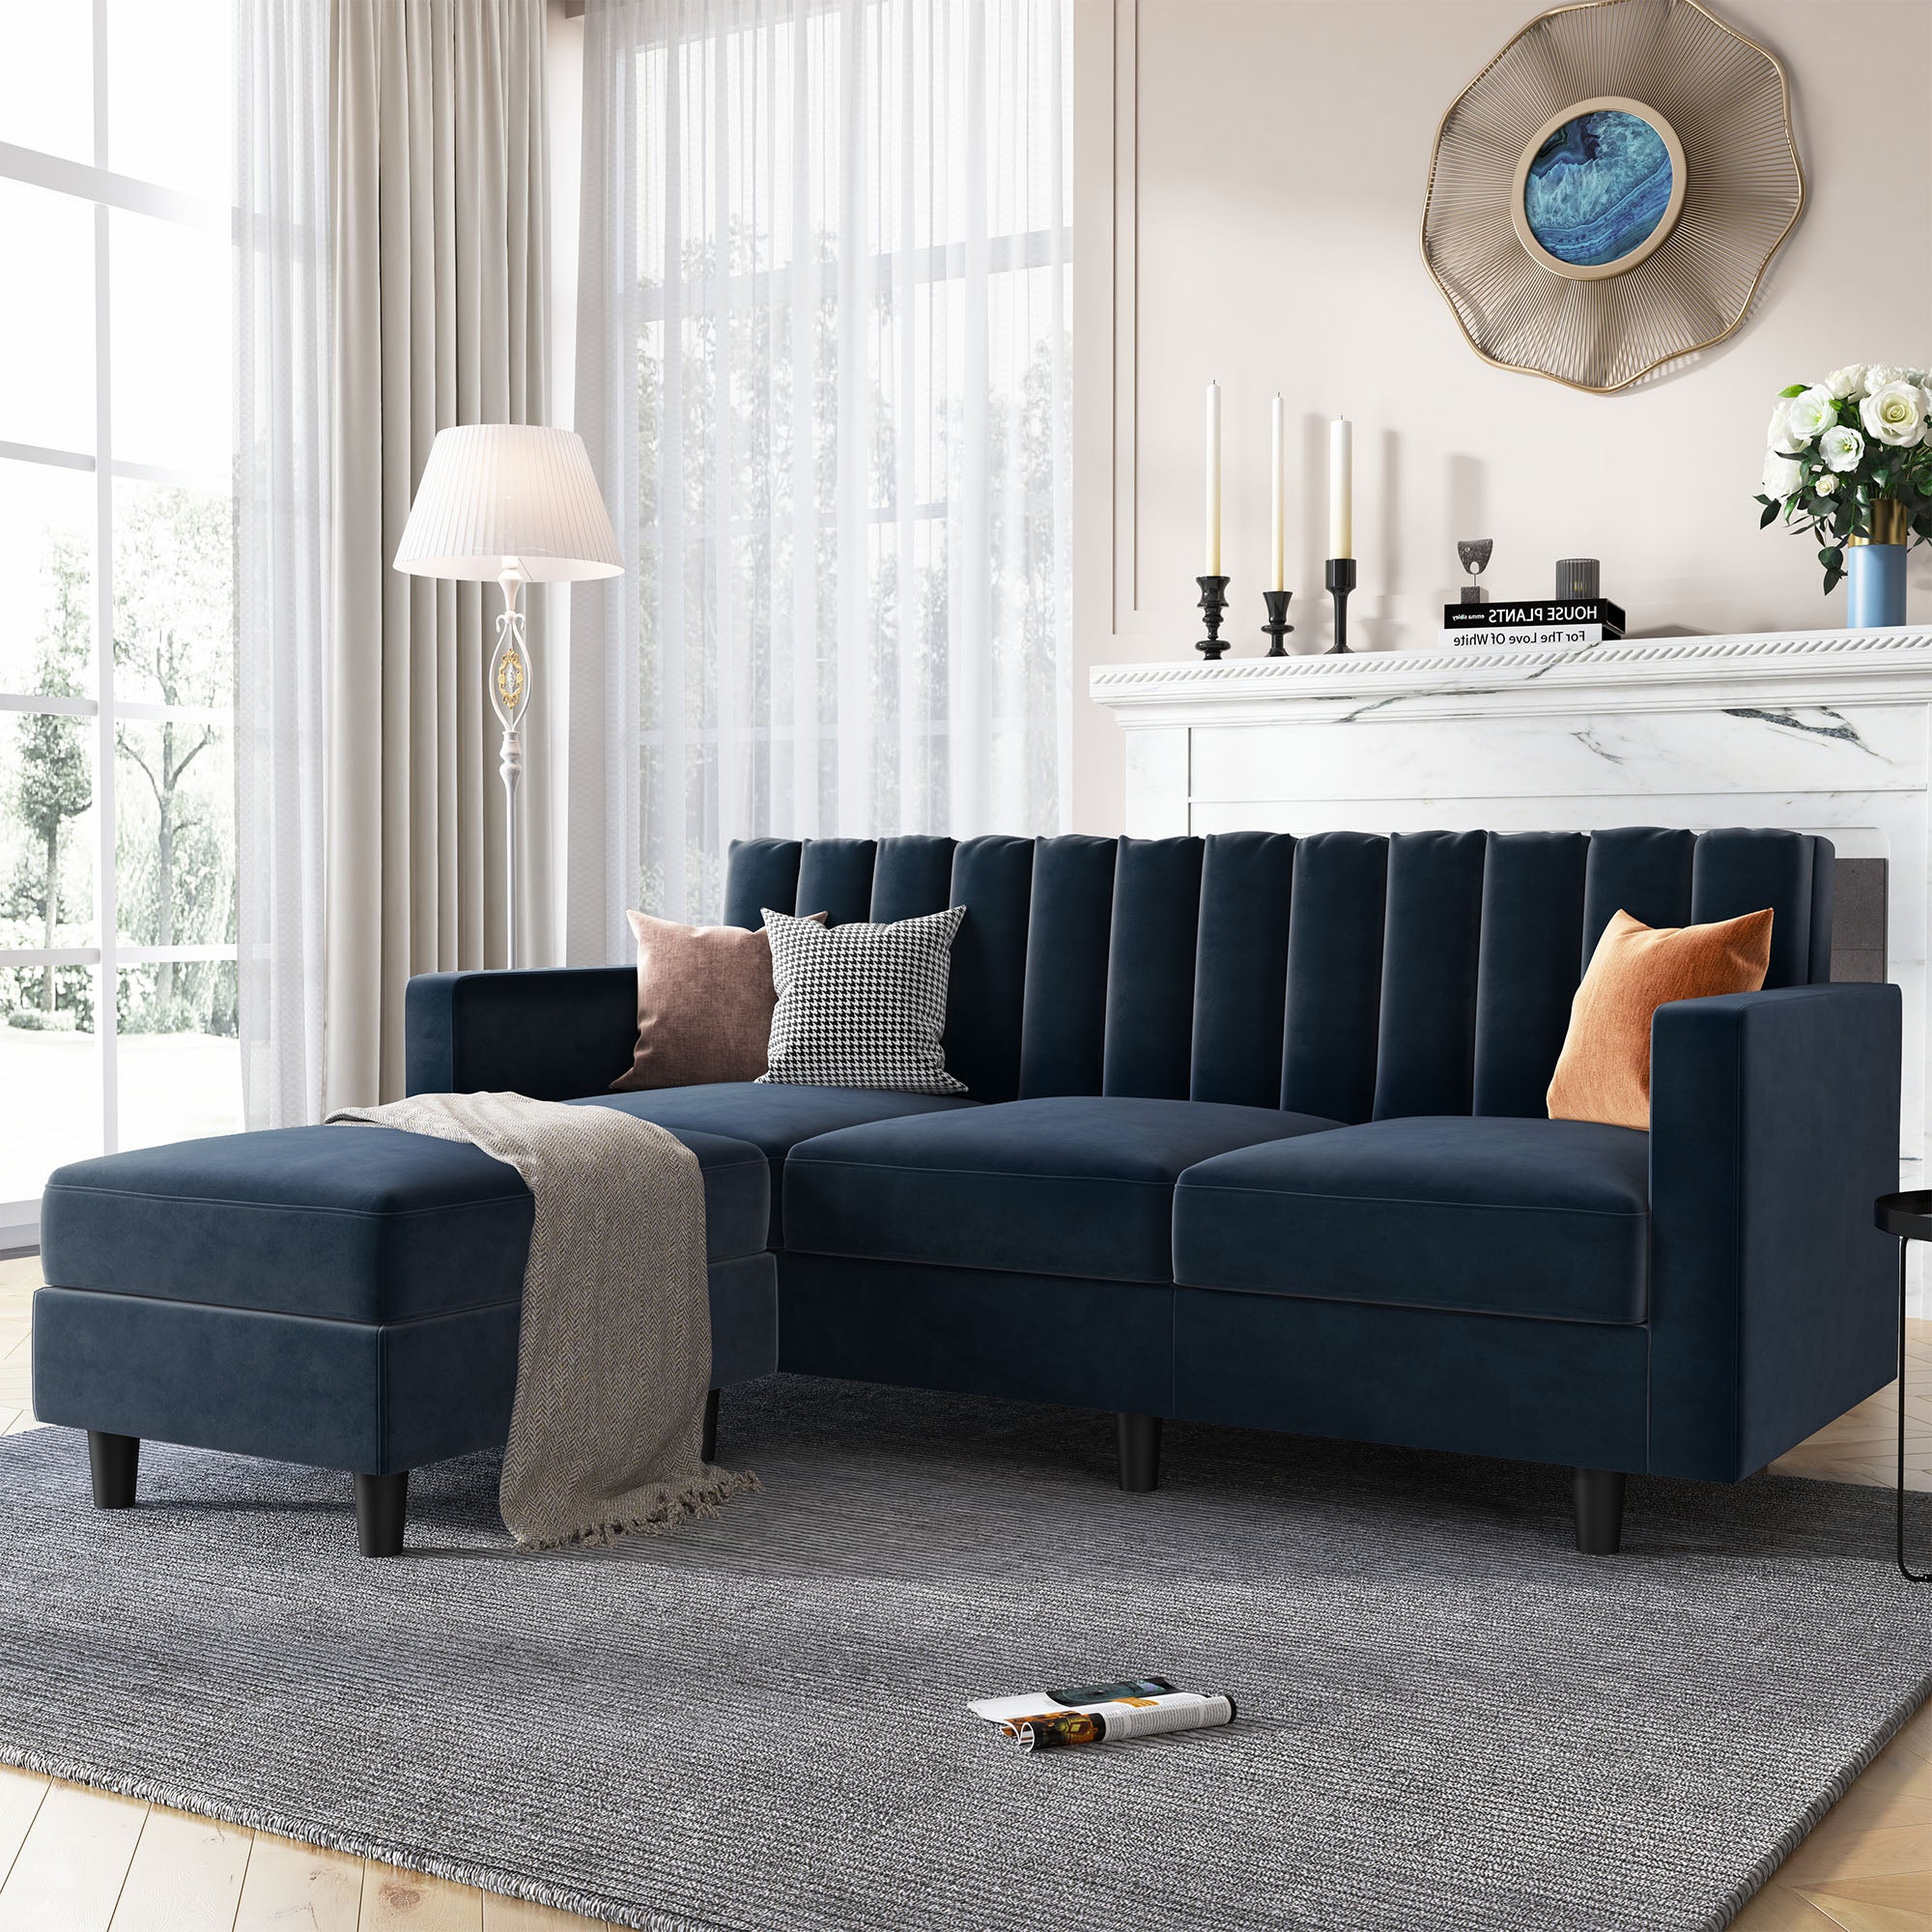 HONBAY Velvet 3-Seat L-Shaped Sectional Sofa with Tufted Back